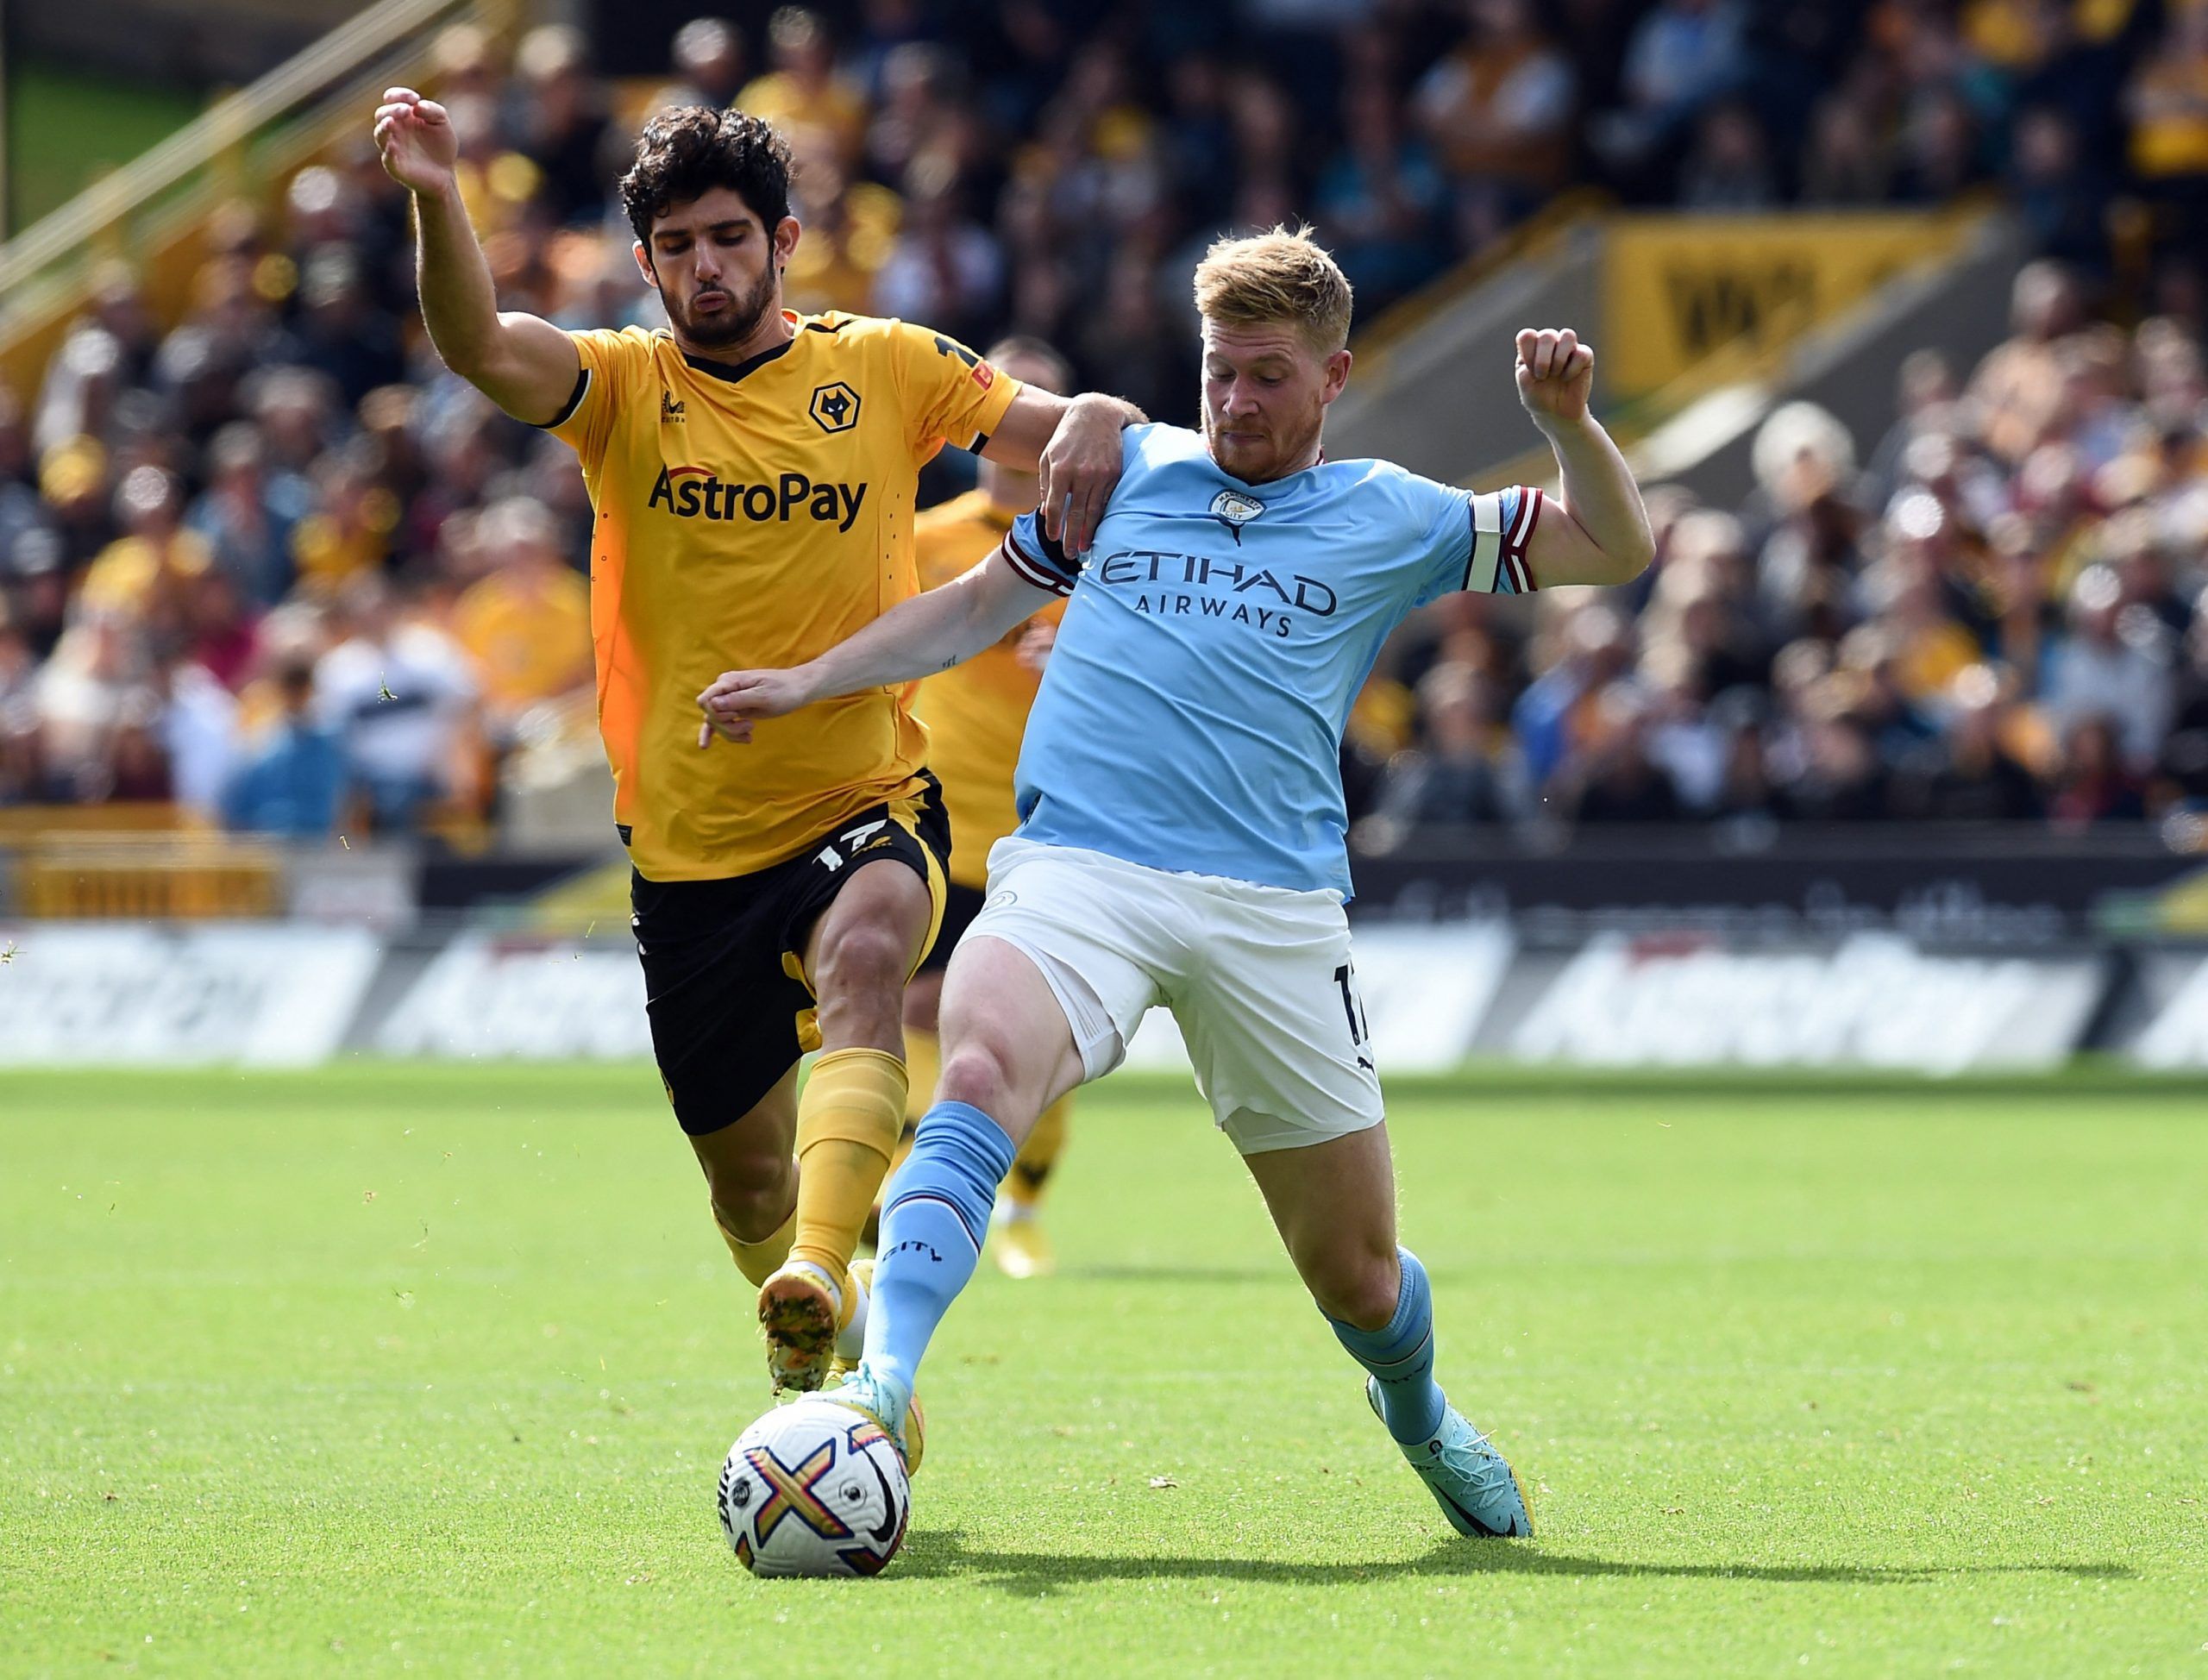 Soccer Football - Premier League - Wolverhampton Wanderers v Manchester City - Molineux Stadium, Wolverhampton, Britain - September 17, 2022 Manchester City's Kevin De Bruyne in action with Wolverhampton Wanderers' Goncalo Guedes REUTERS/Peter Powell EDITORIAL USE ONLY. No use with unauthorized audio, video, data, fixture lists, club/league logos or 'live' services. Online in-match use limited to 75 images, no video emulation. No use in betting, games or single club /league/player publications. 